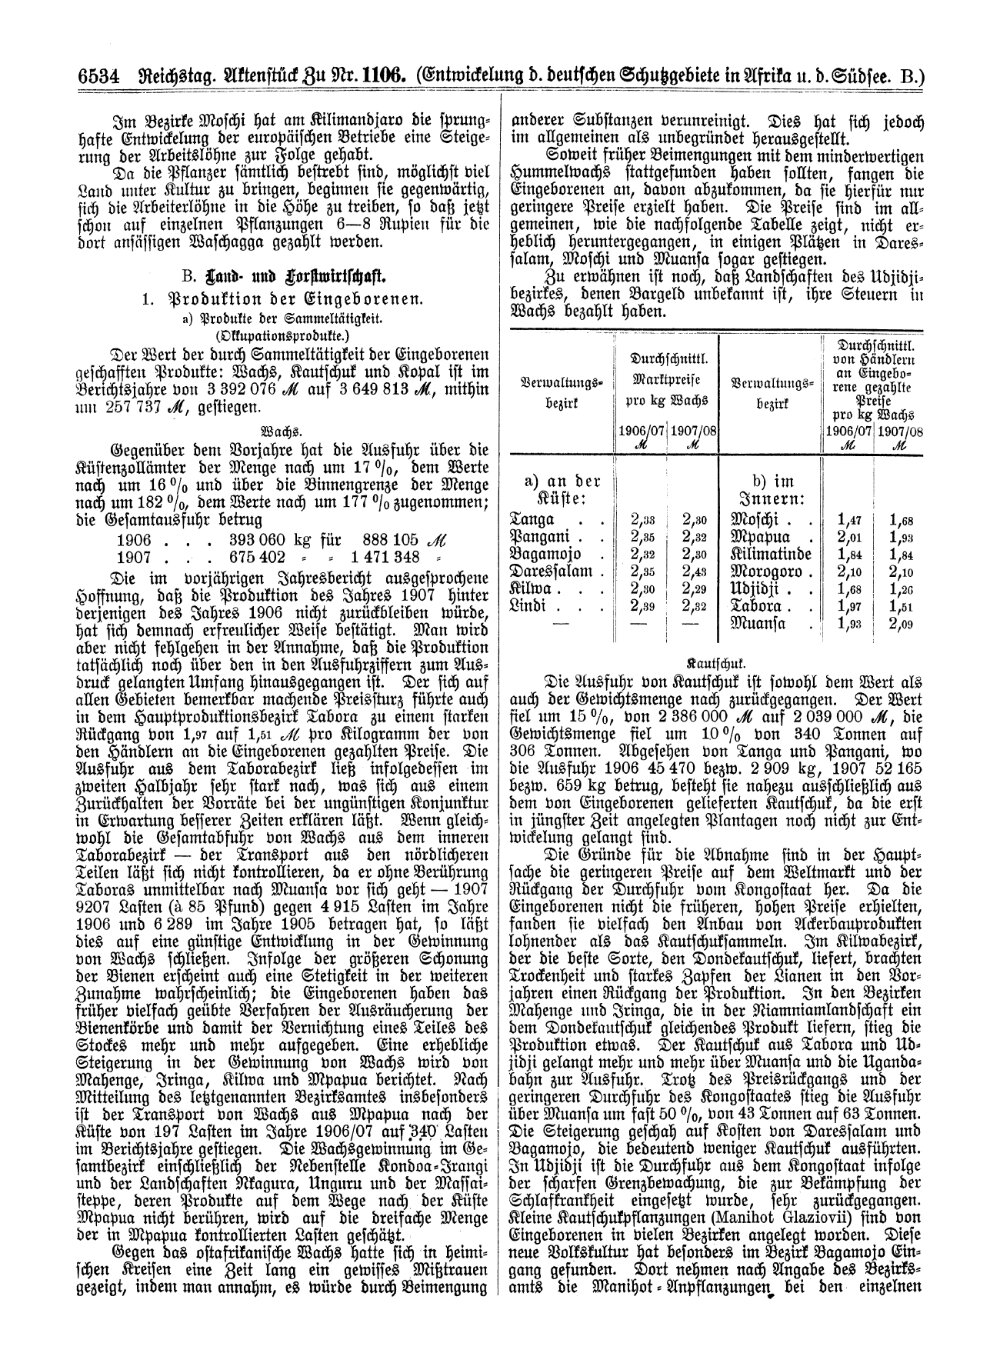 Scan of page 6534